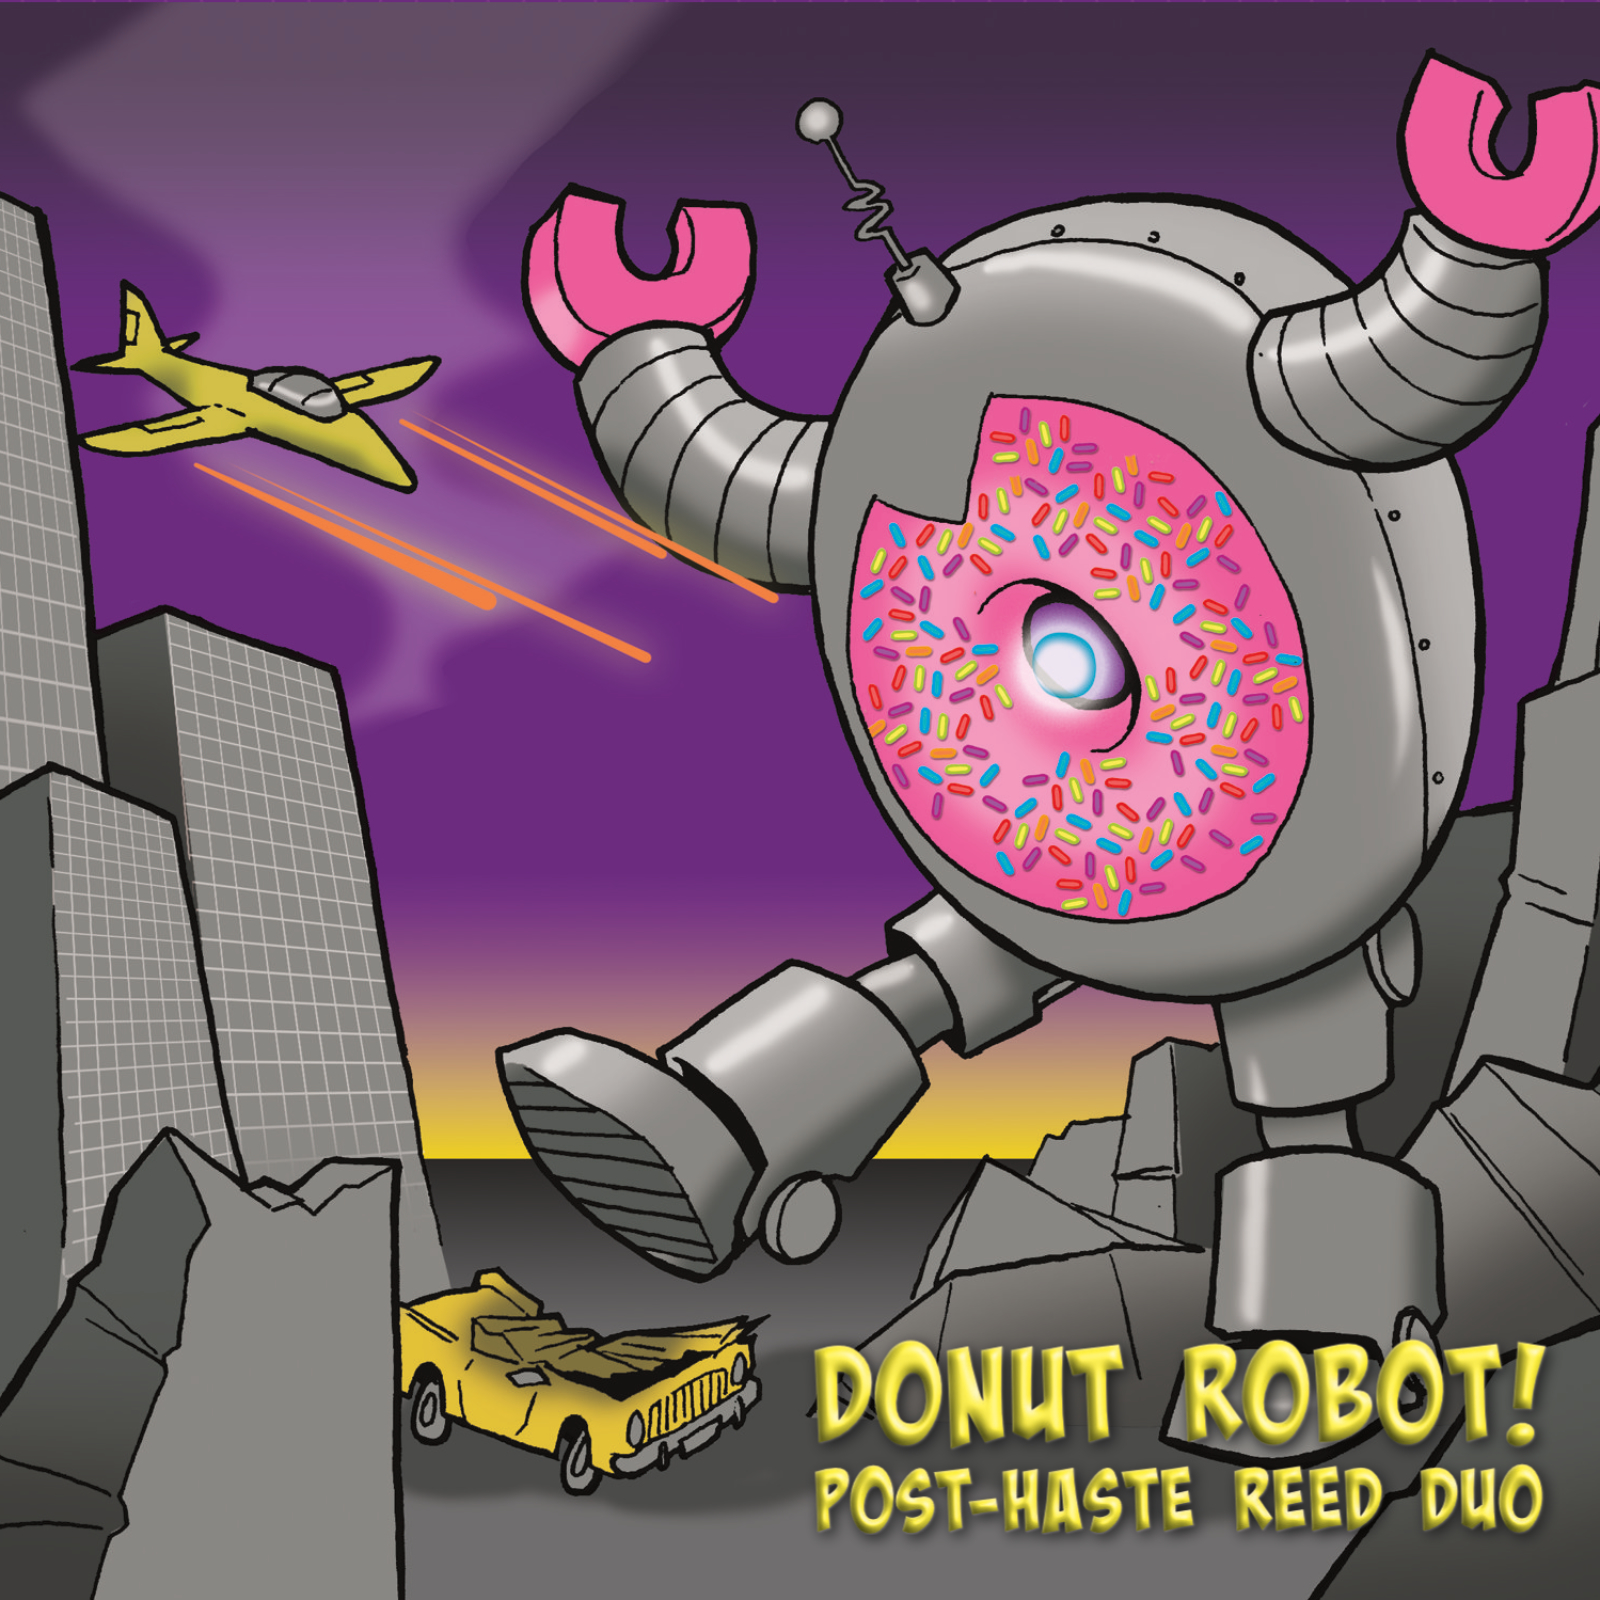 Donut Robot! by Post-Haste Reed Duo